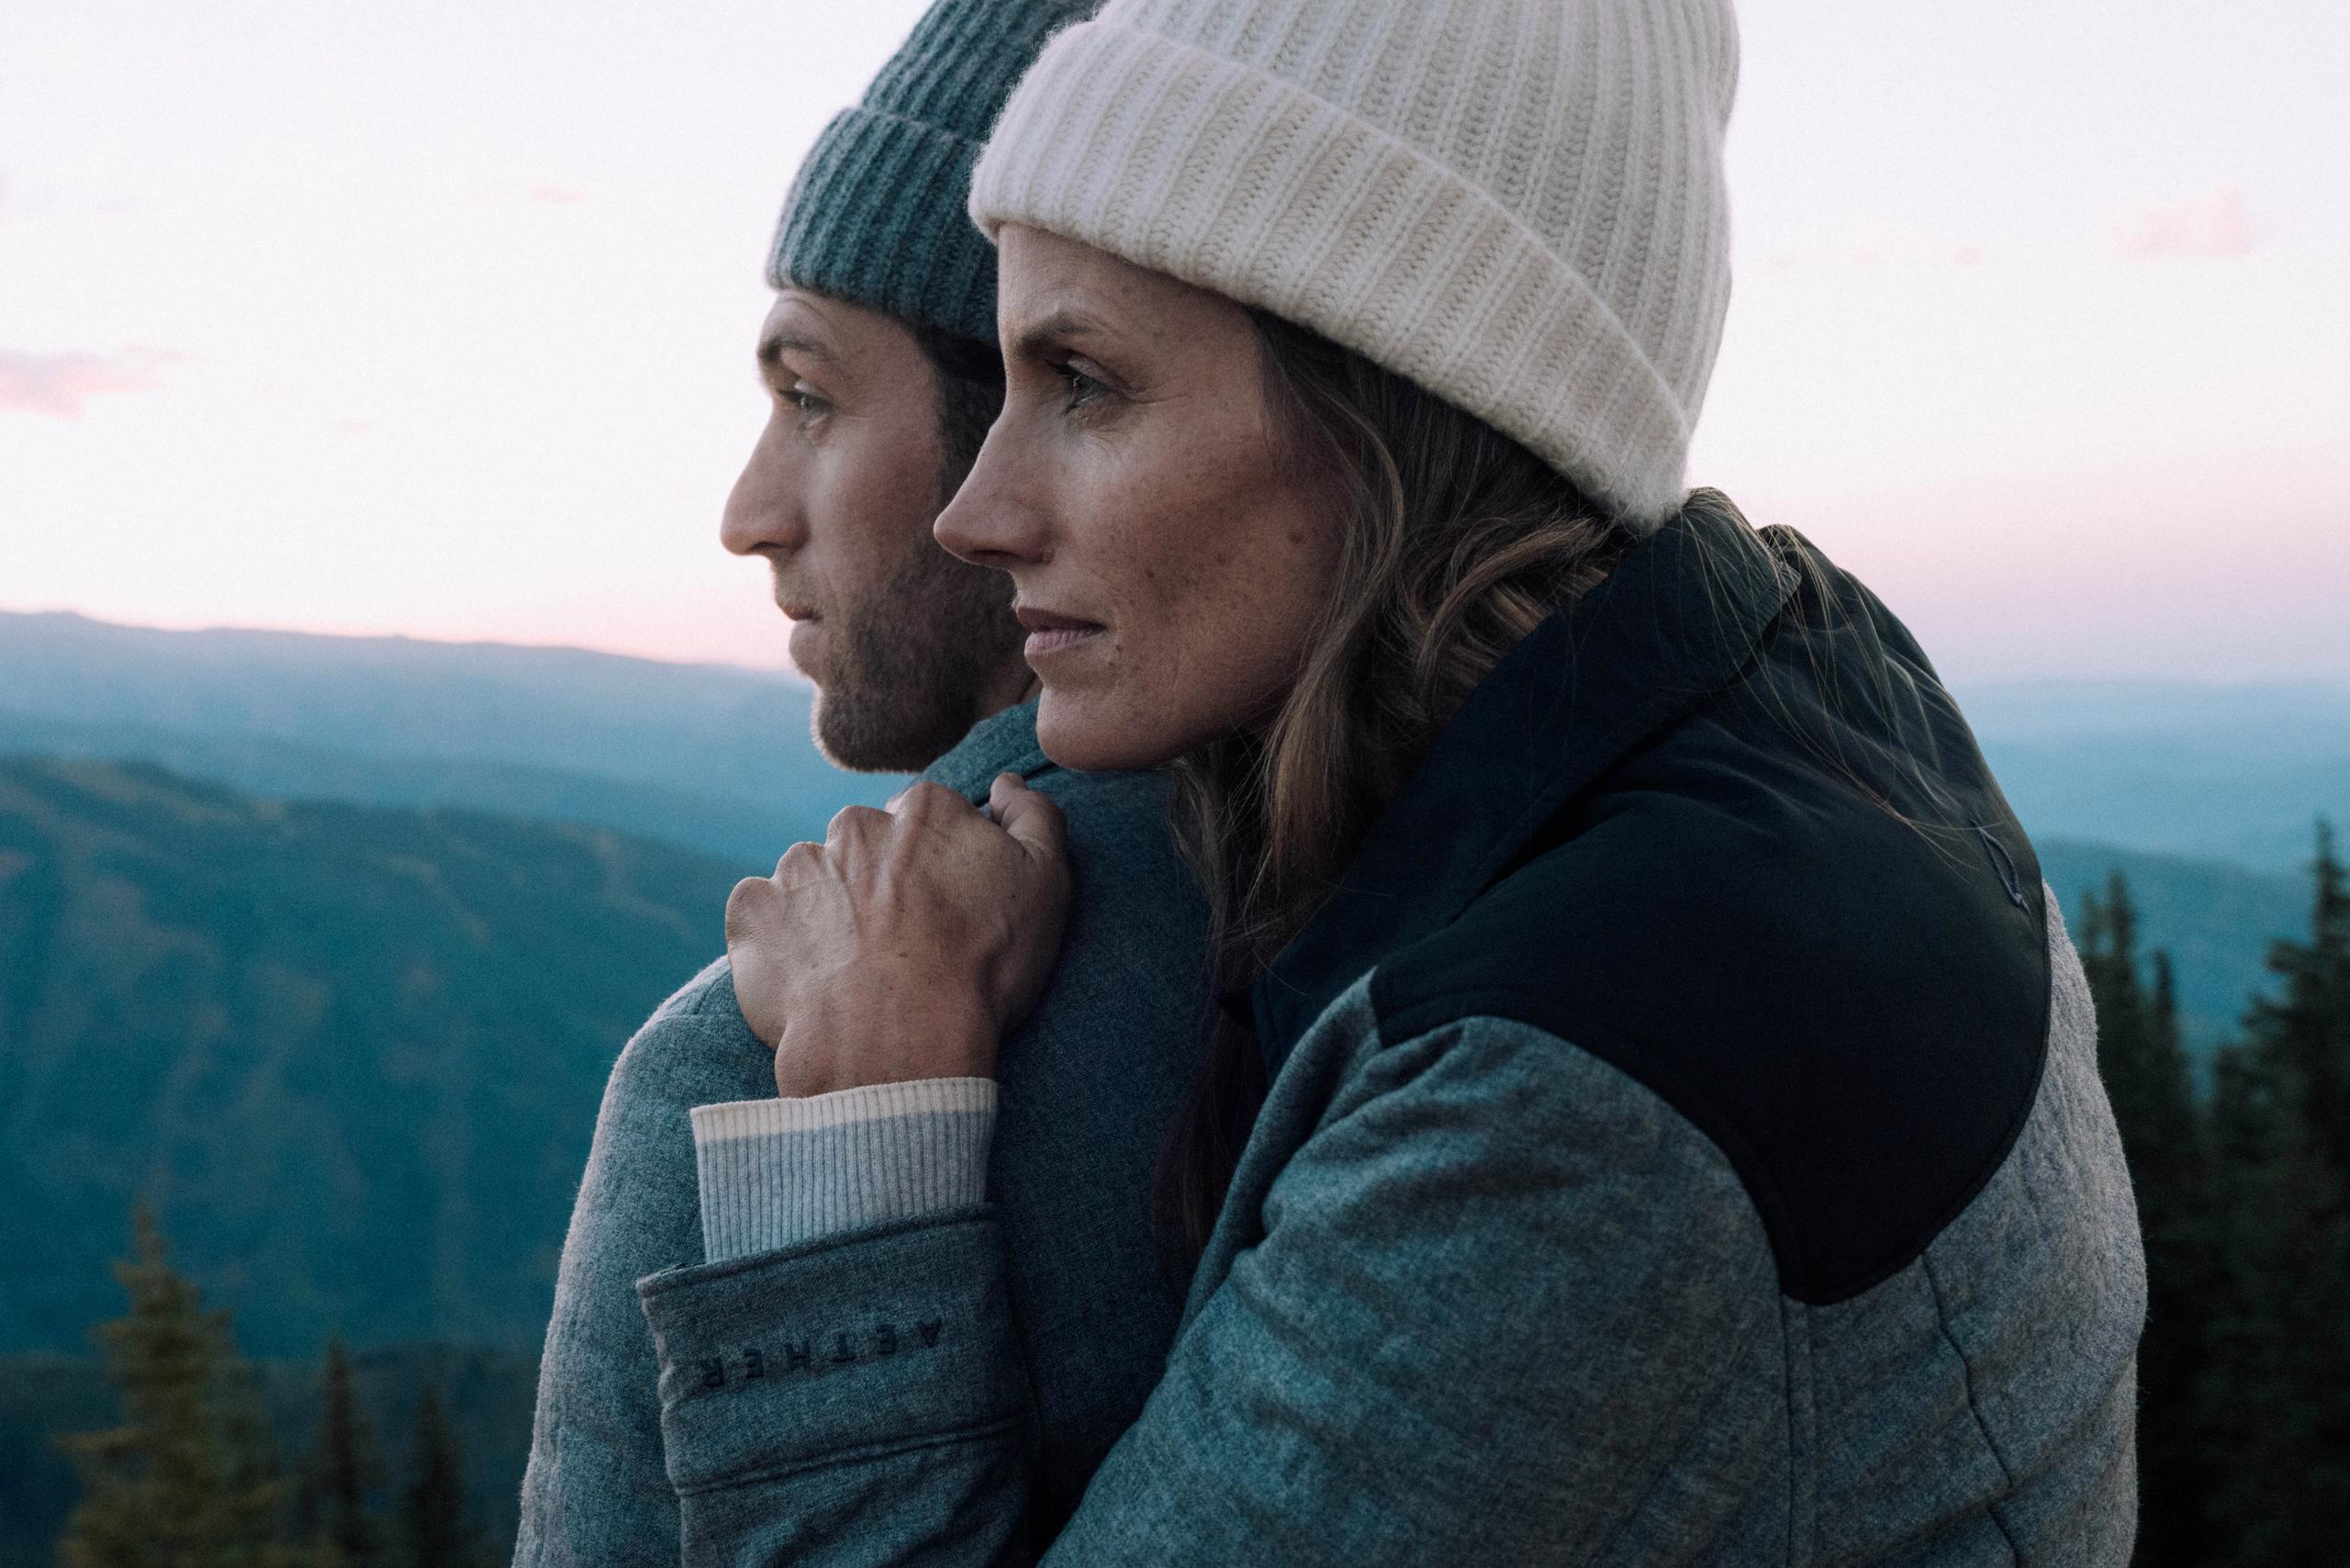 Profile of woman leaning on man's shoulder in front of Aspen mountains